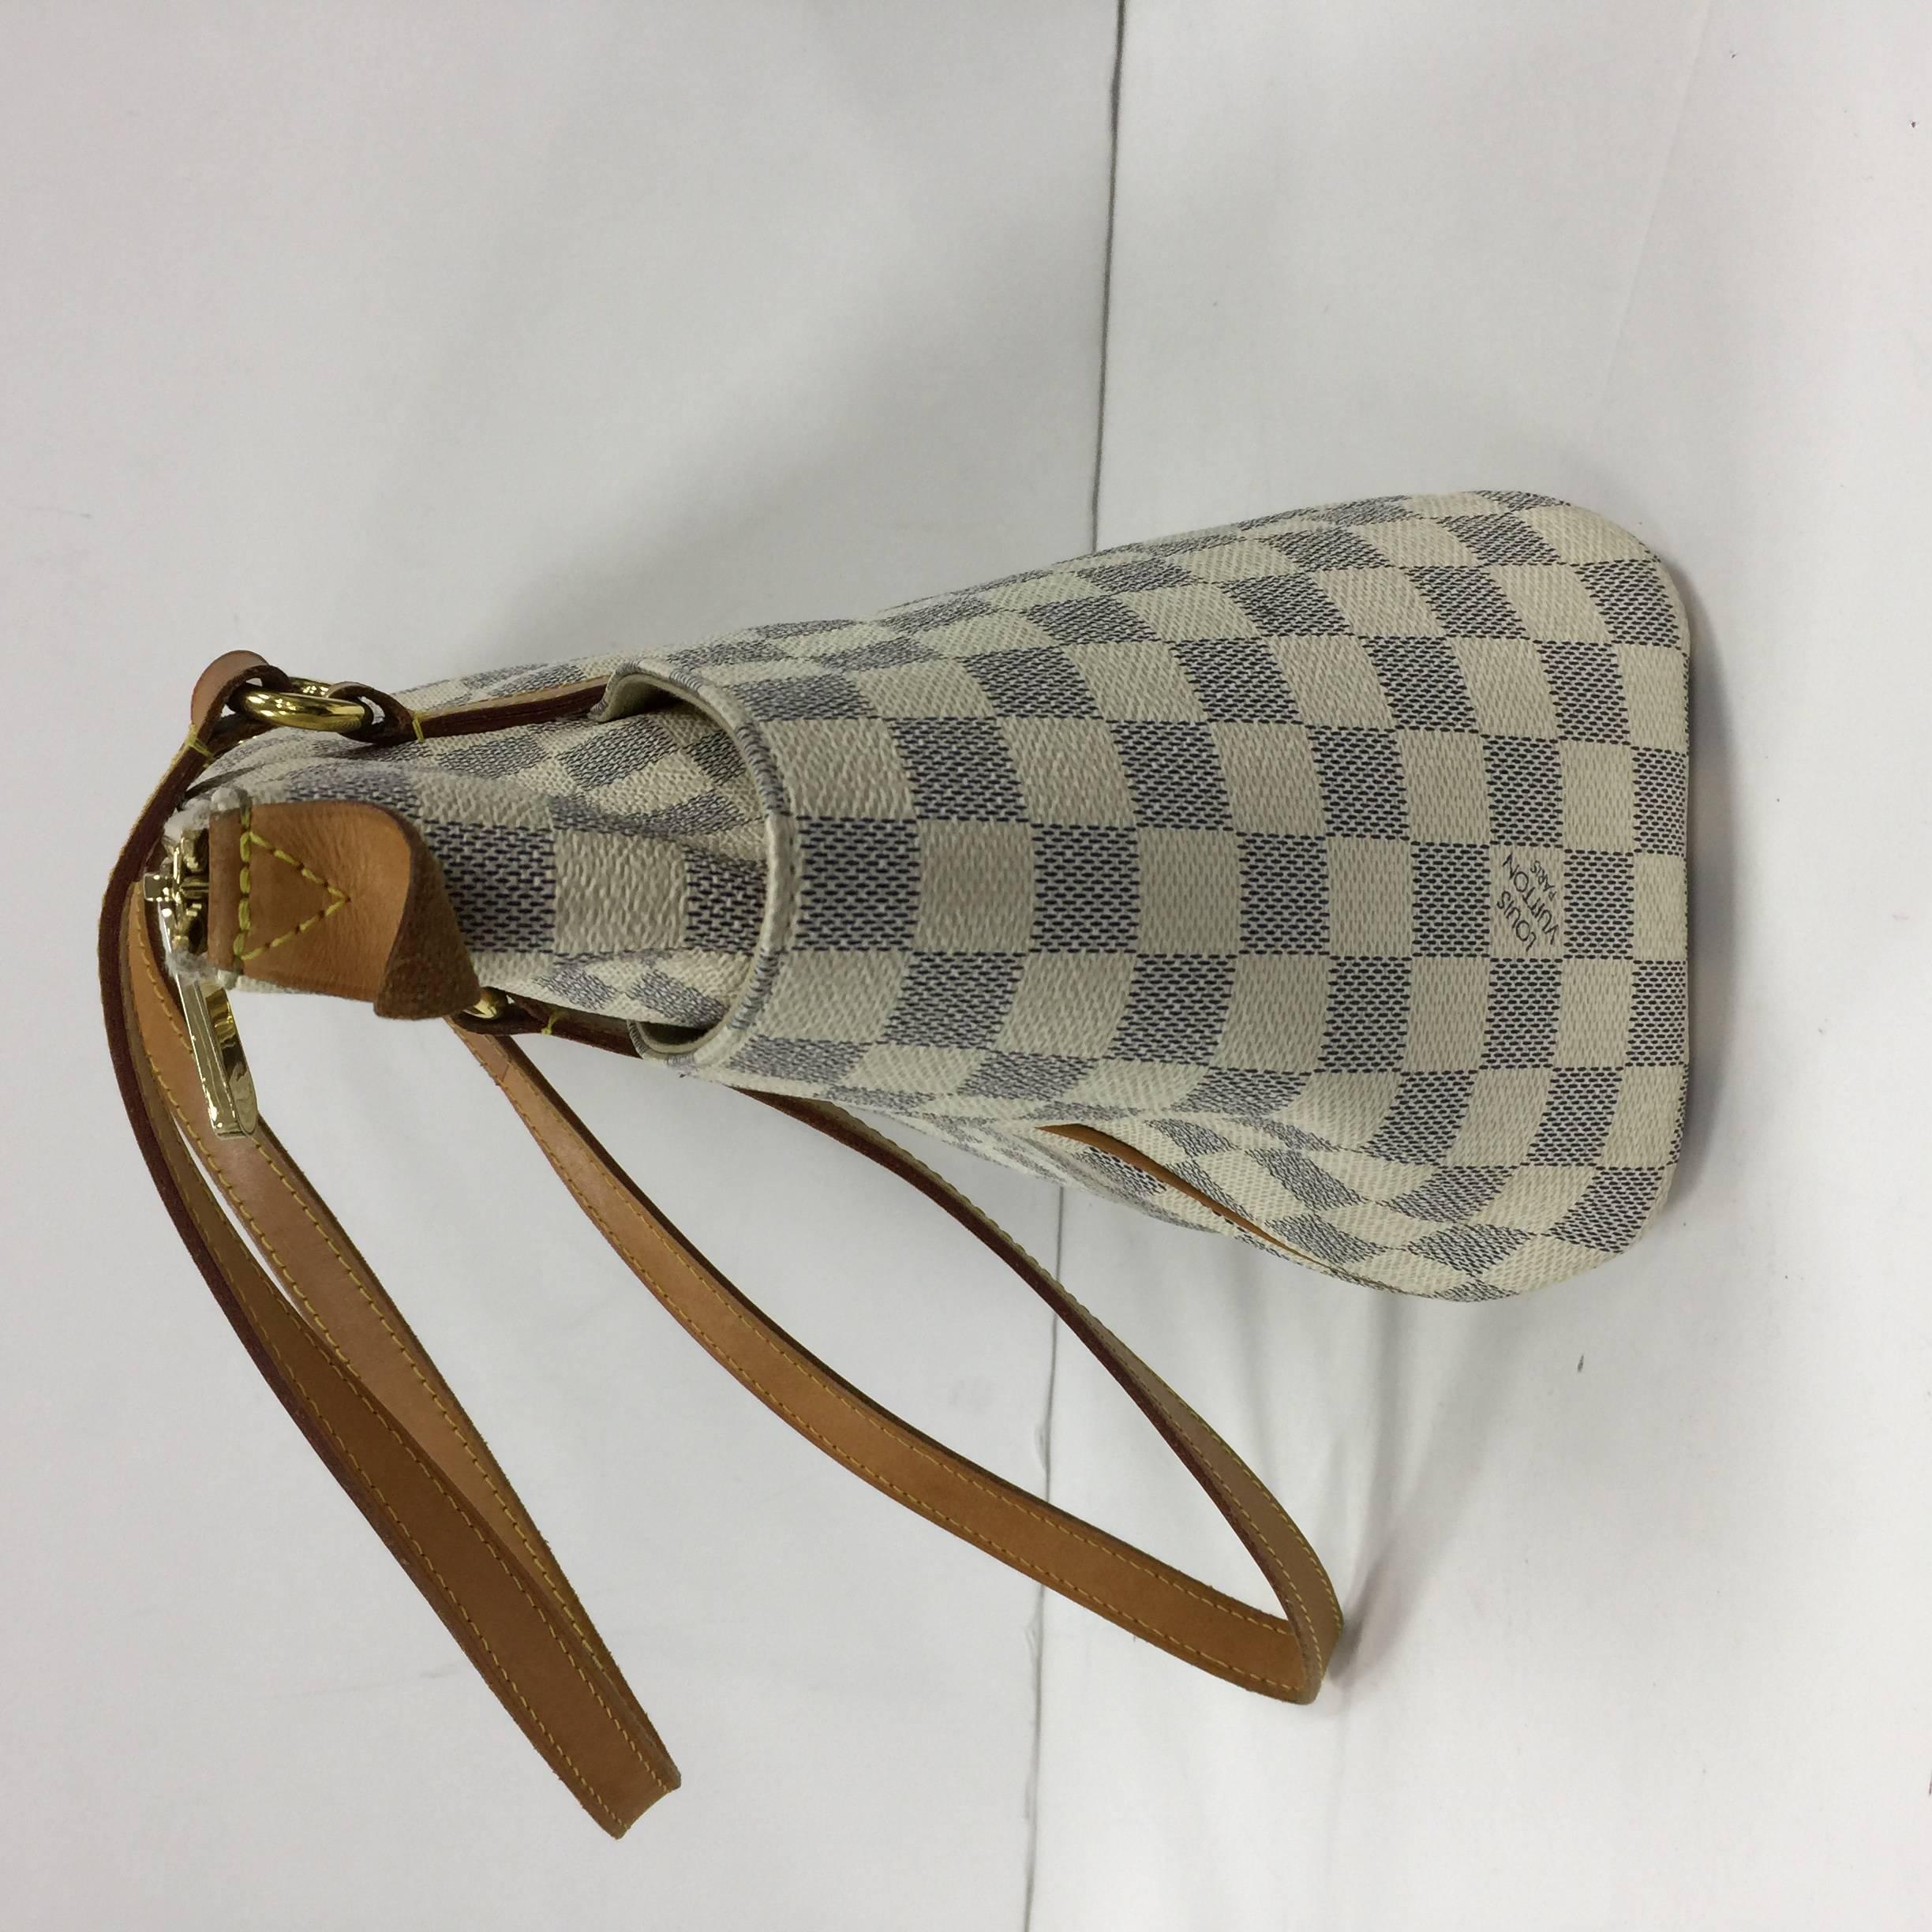 This authentic Louis Vuitton Totally Handbag Damier PM is a chic and practical bag for everyday occasions. Crafted from Louis Vuitton's iconic damier azur coated canvas, this simple city tote features tall cowhide leather handles and trims, two